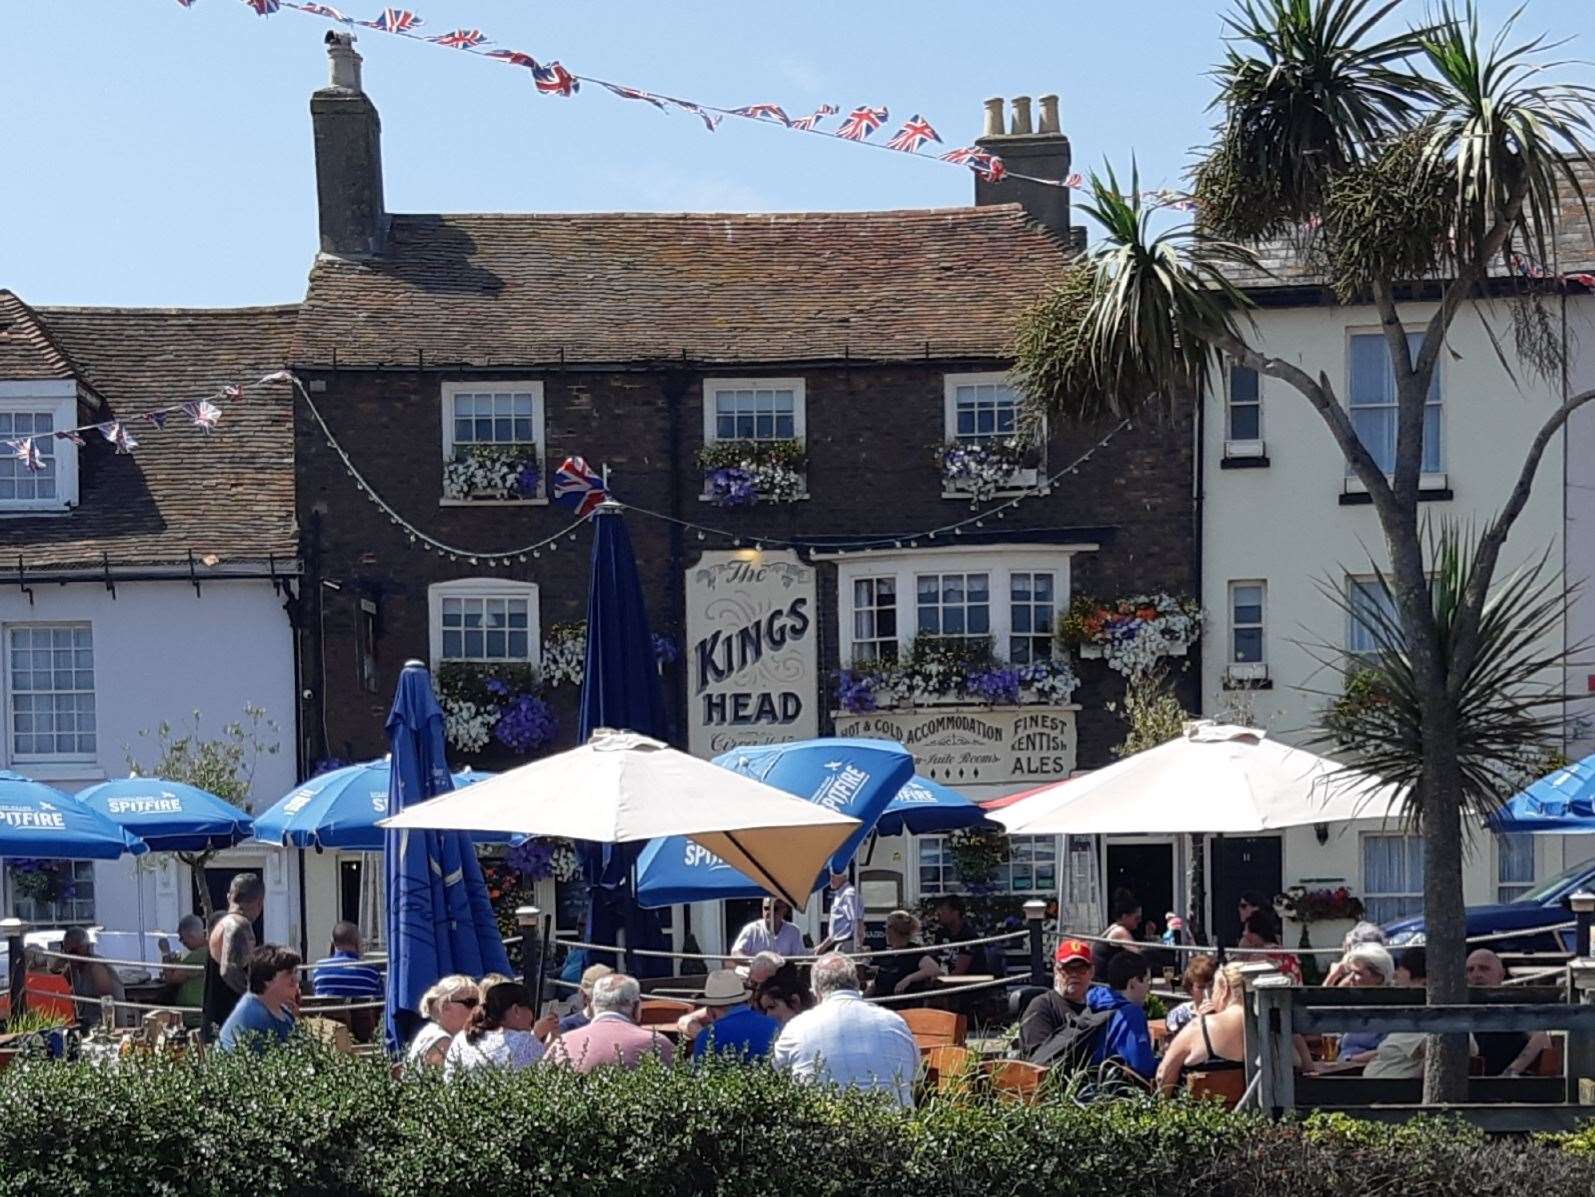 The King's Head in Deal is right next to the beach